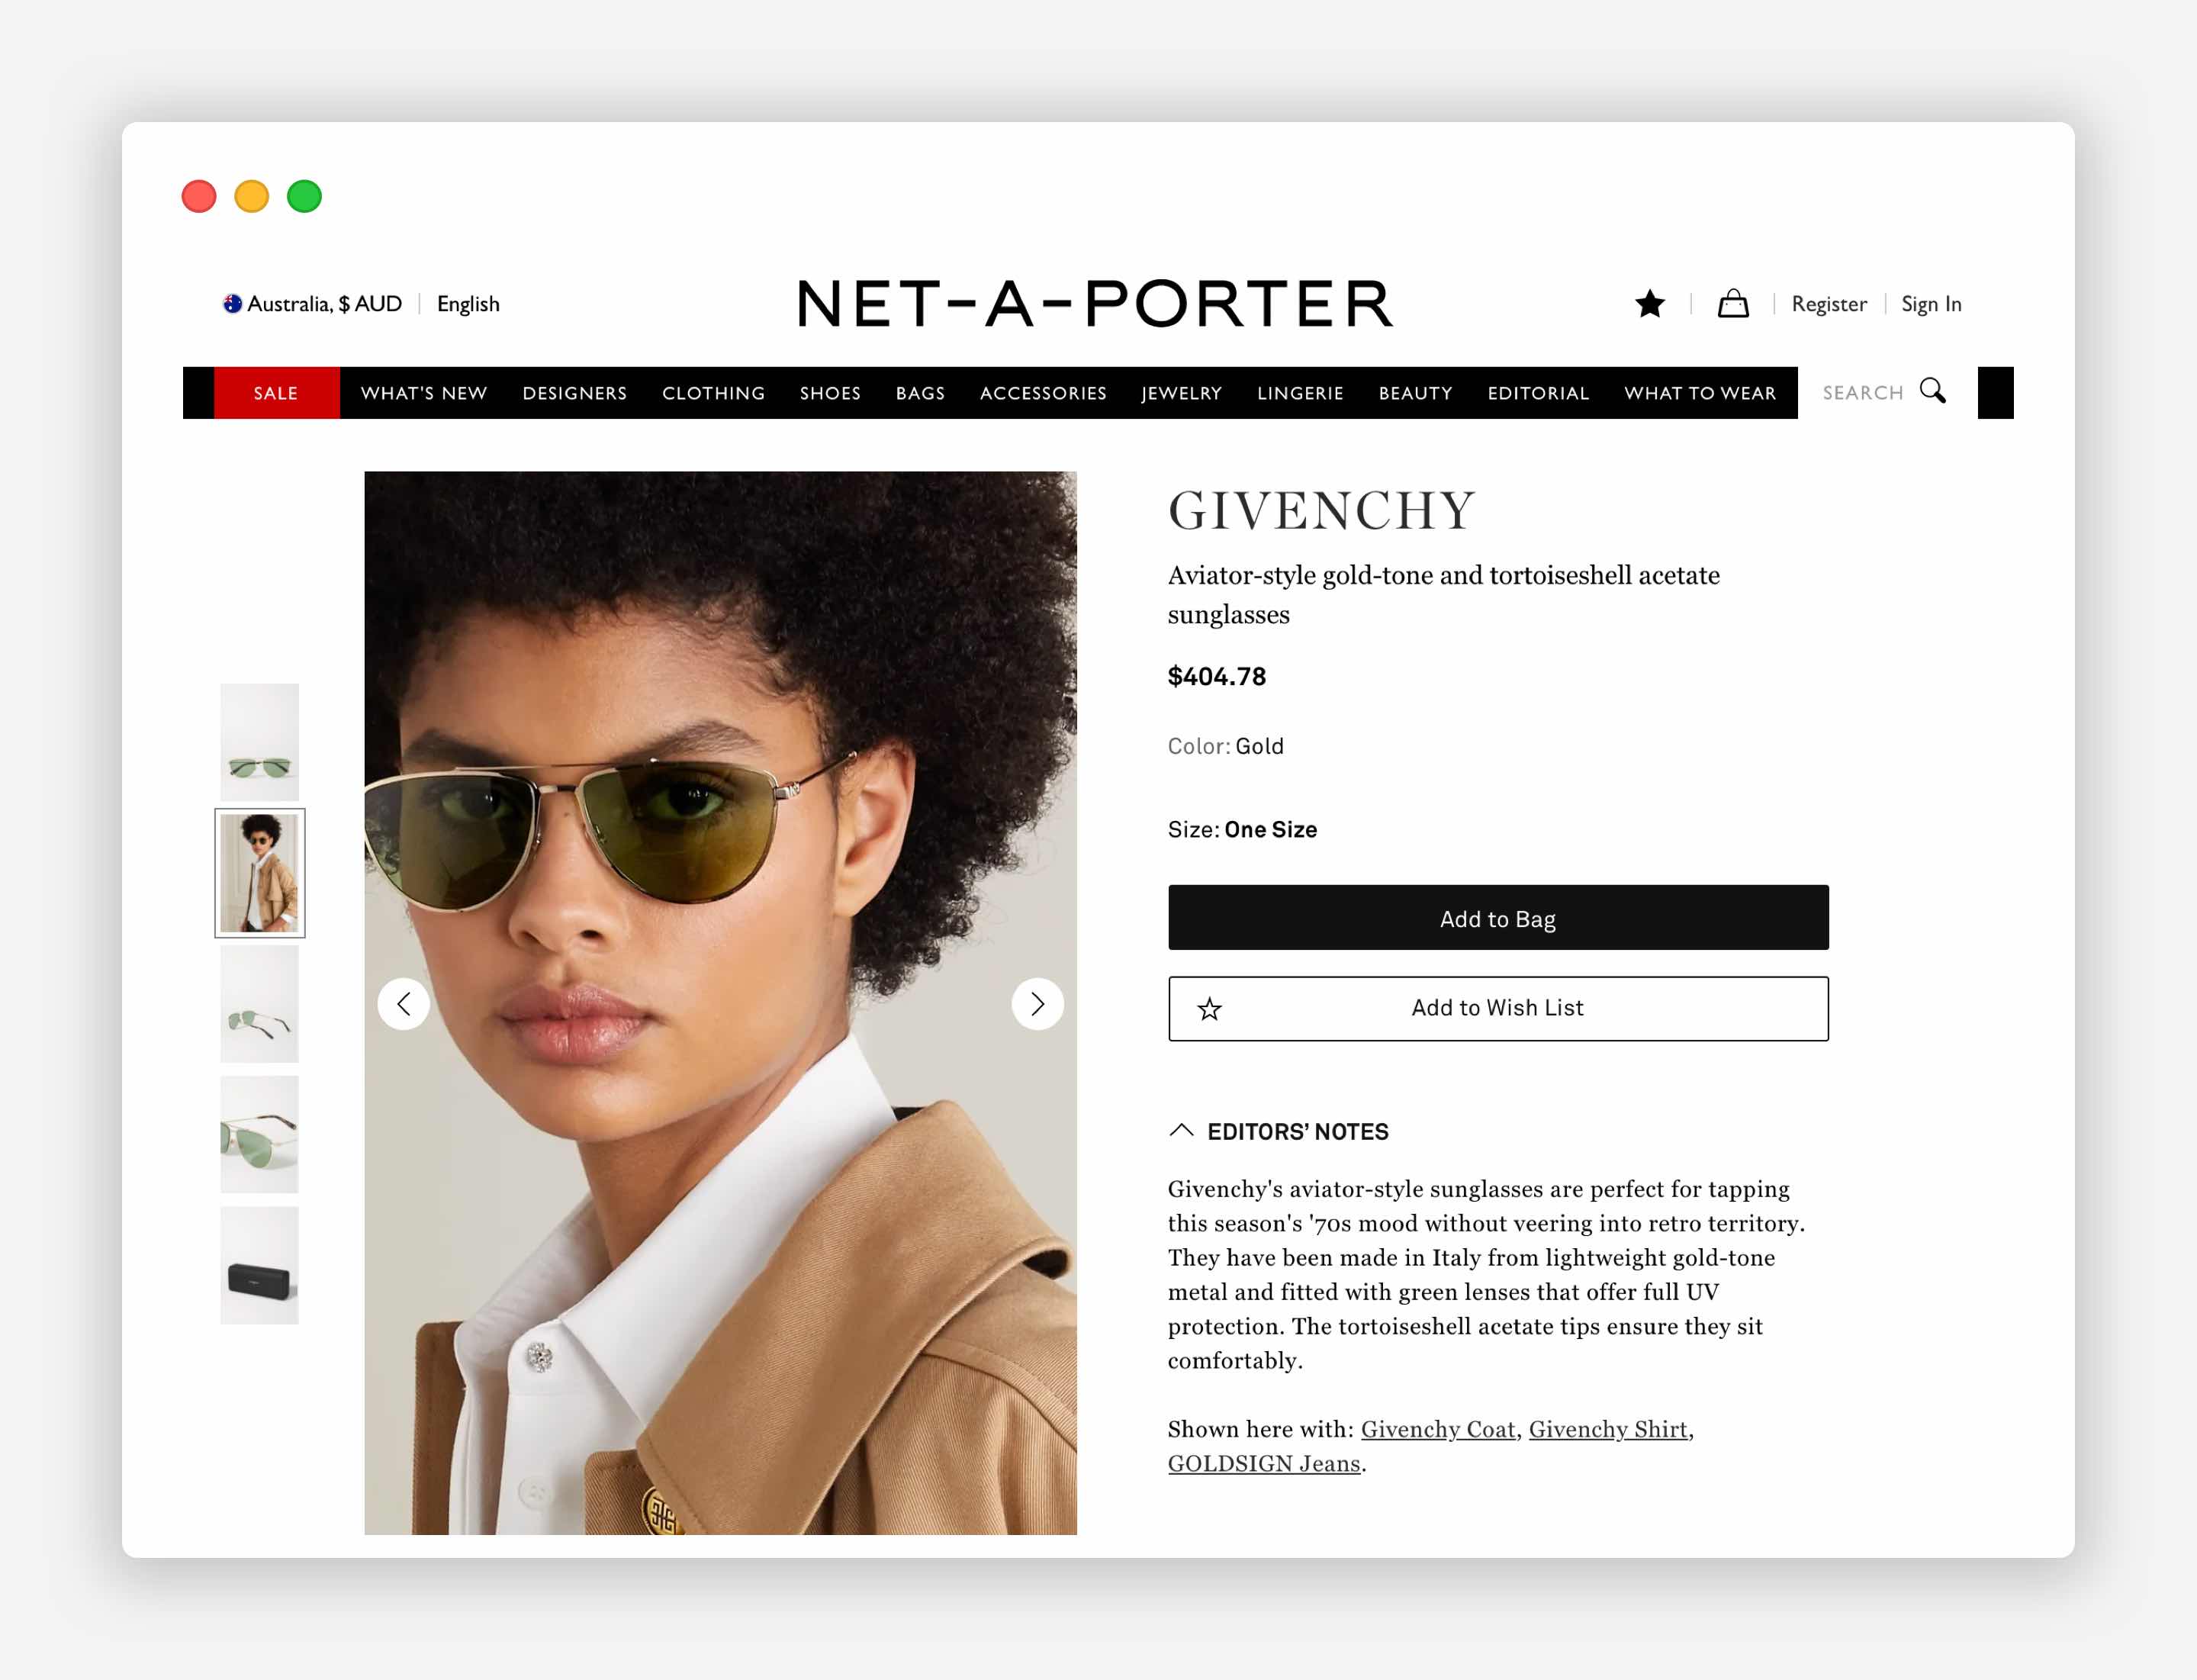 Product image and Product Description on the product page. The Net-a-porter example